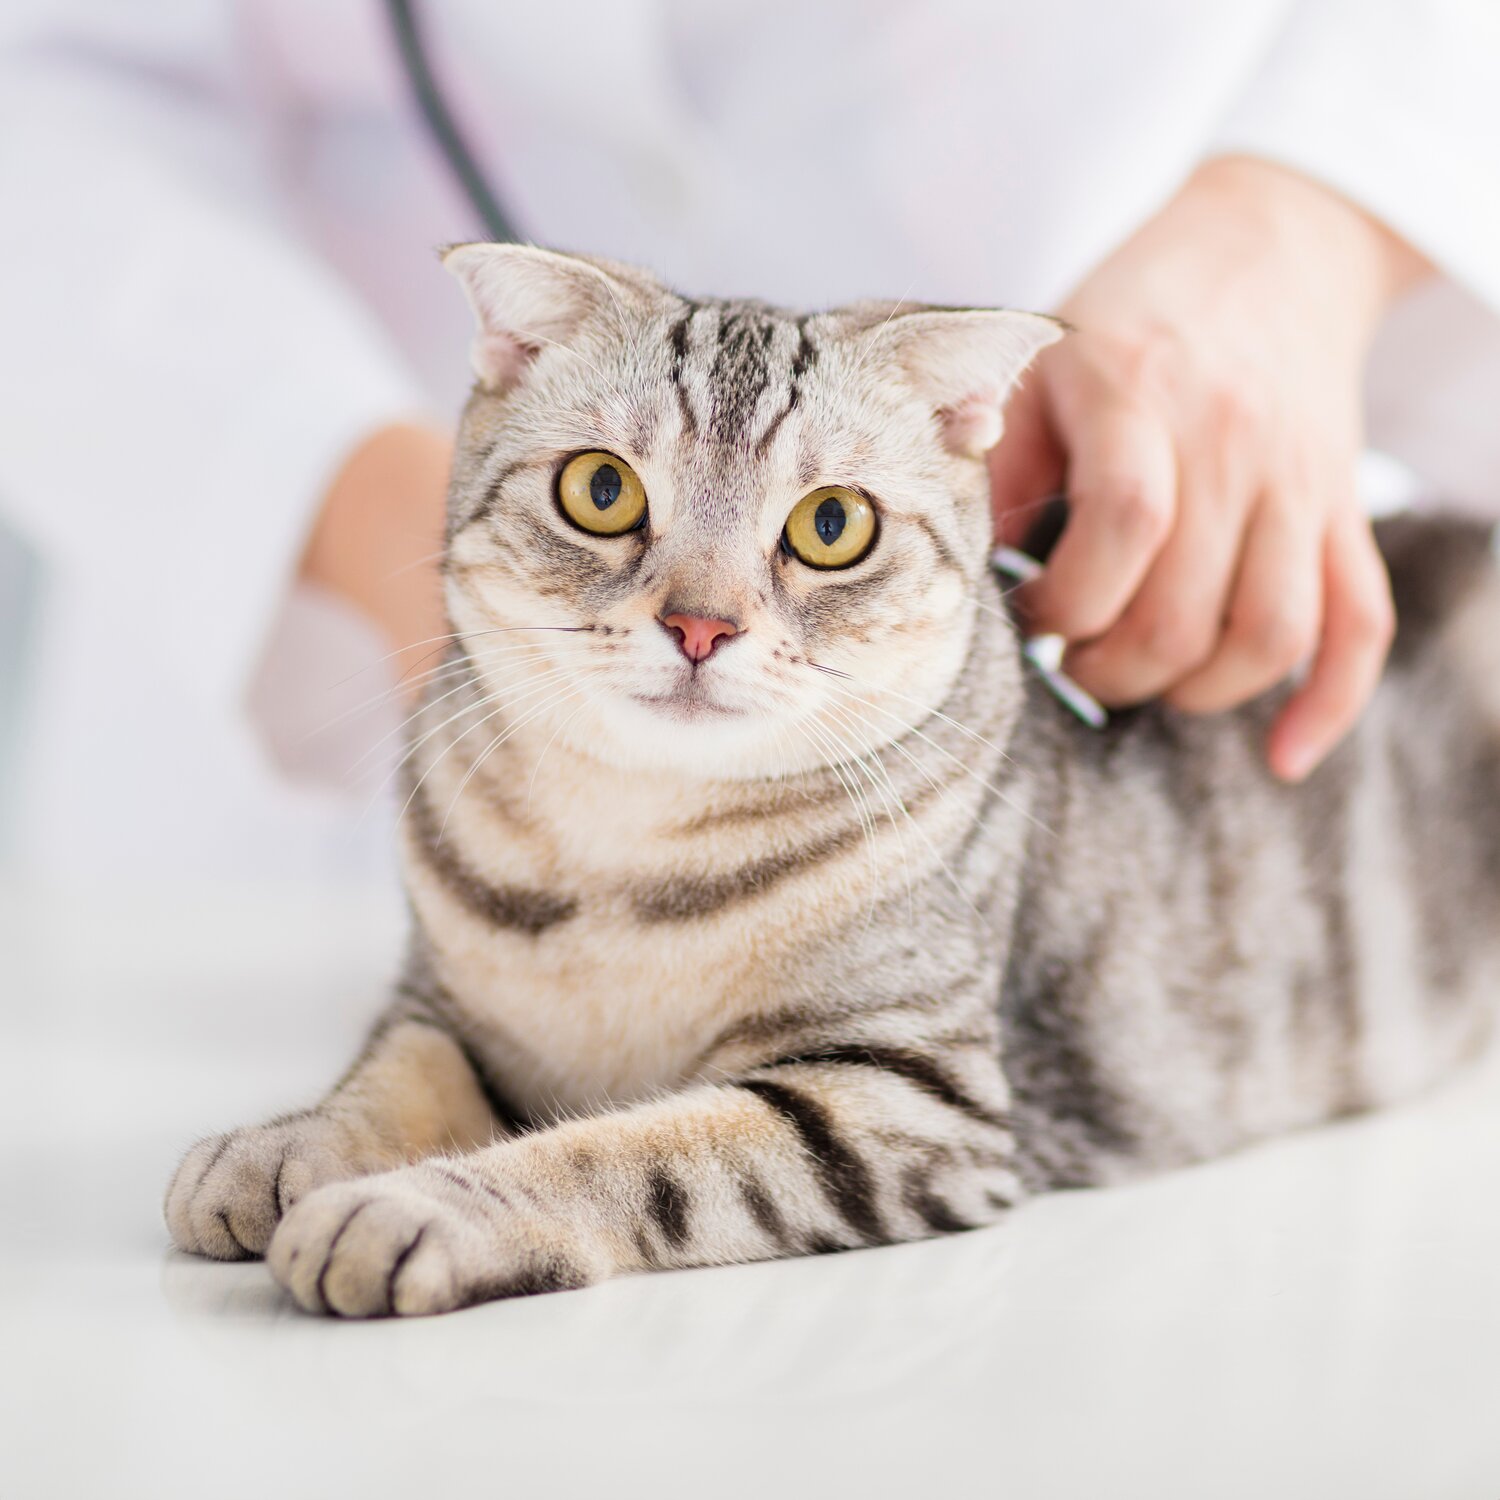 A content, striped cat being examined by a veterinarian.